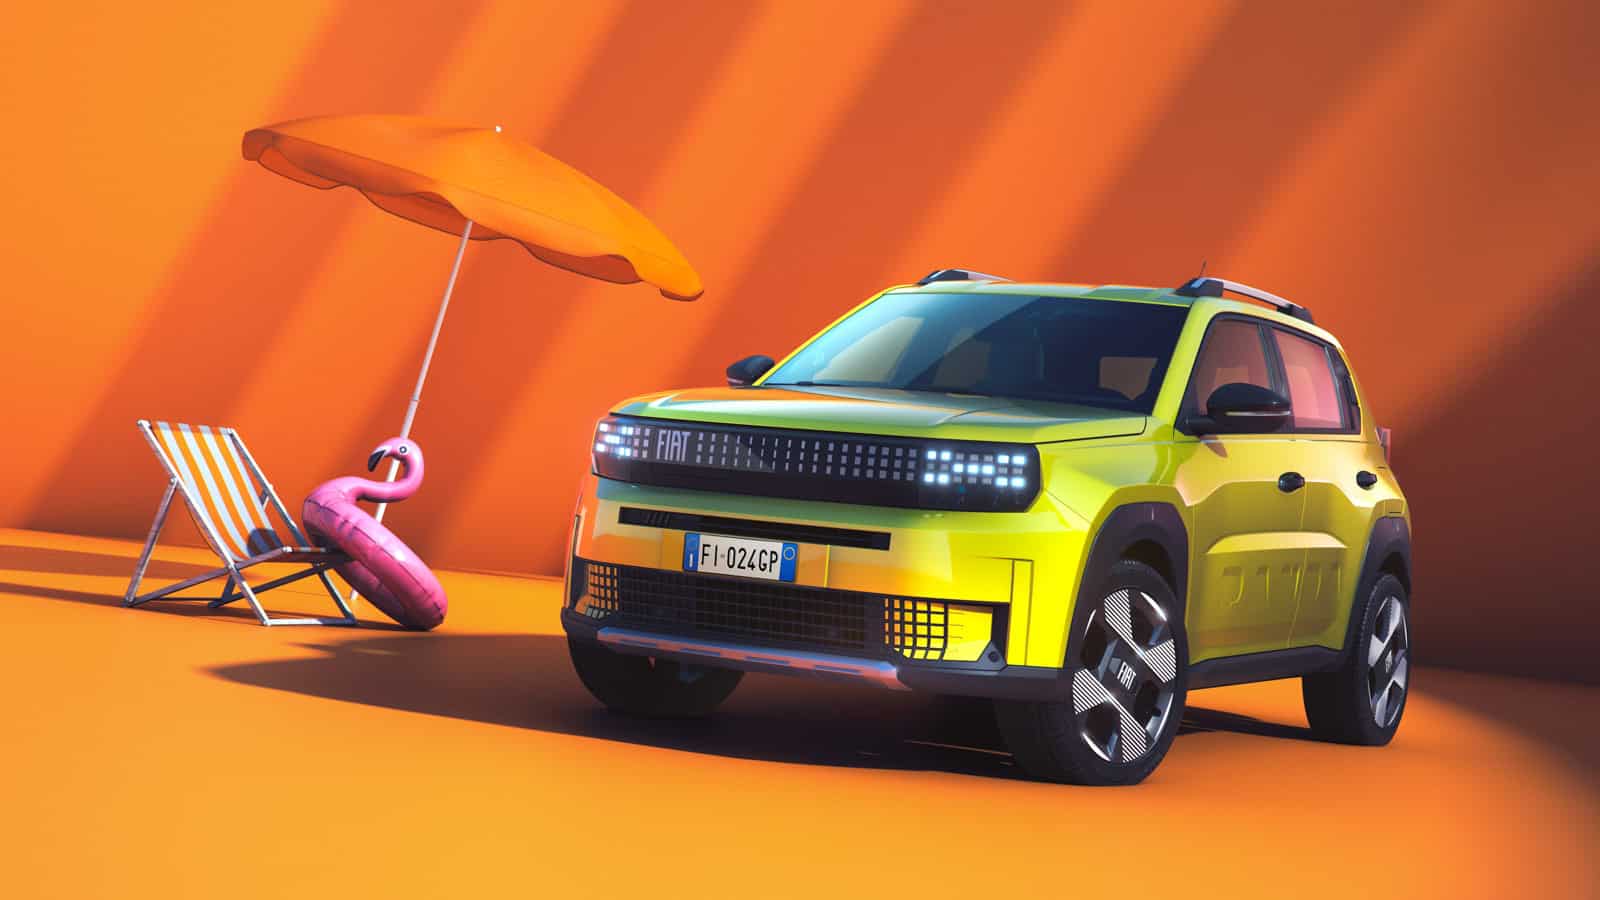 Fiat Grande Panda Electric Car Pays Homage to Iconic Design